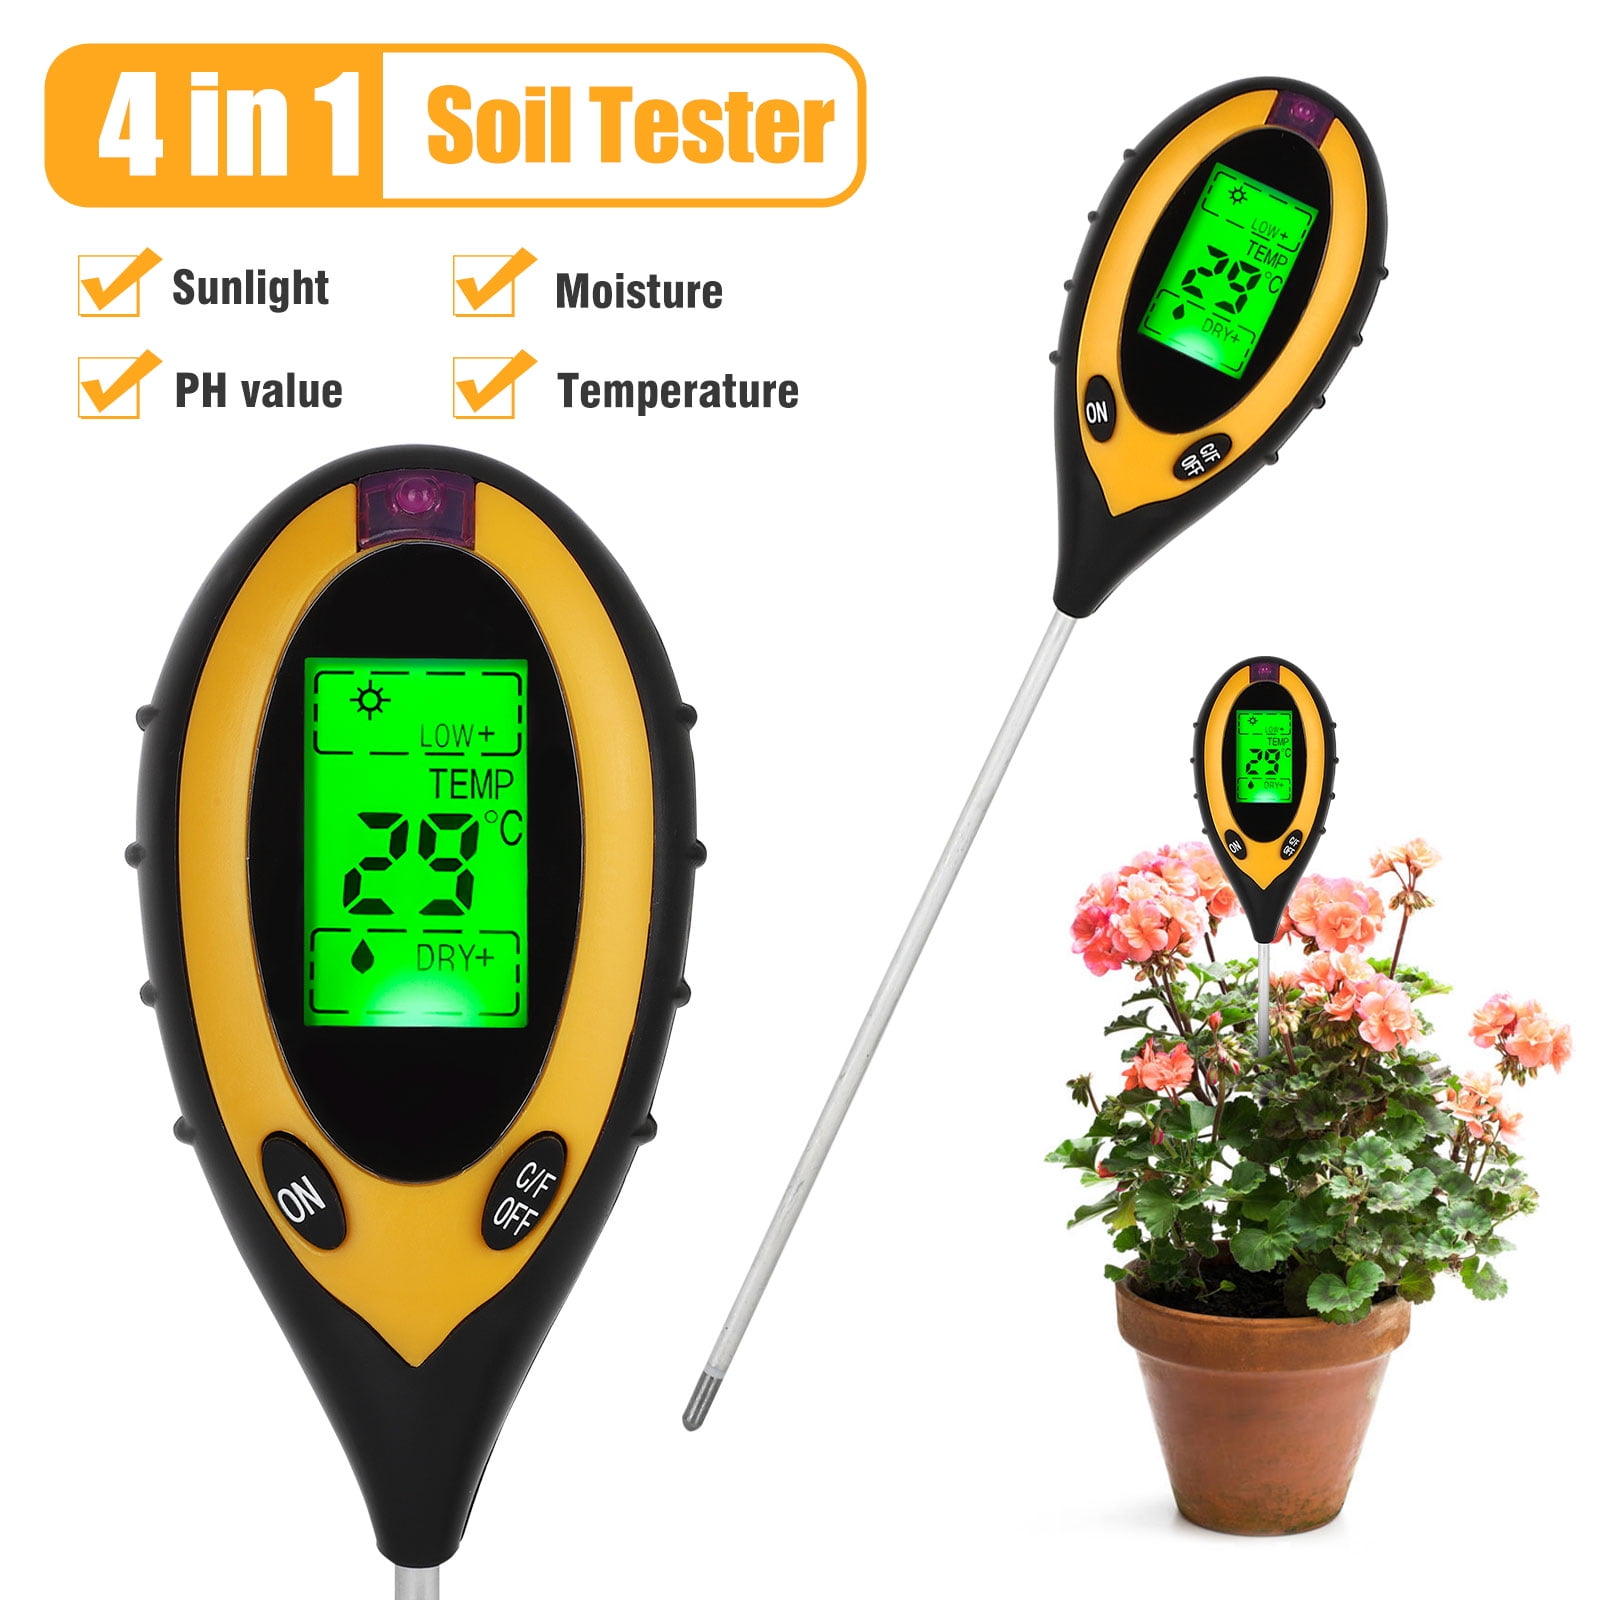 Digital Temperature，LtrottedJ 2in1 Plant Earth Flowers Soil Humidity Temperature Meter Tester Analyzer 